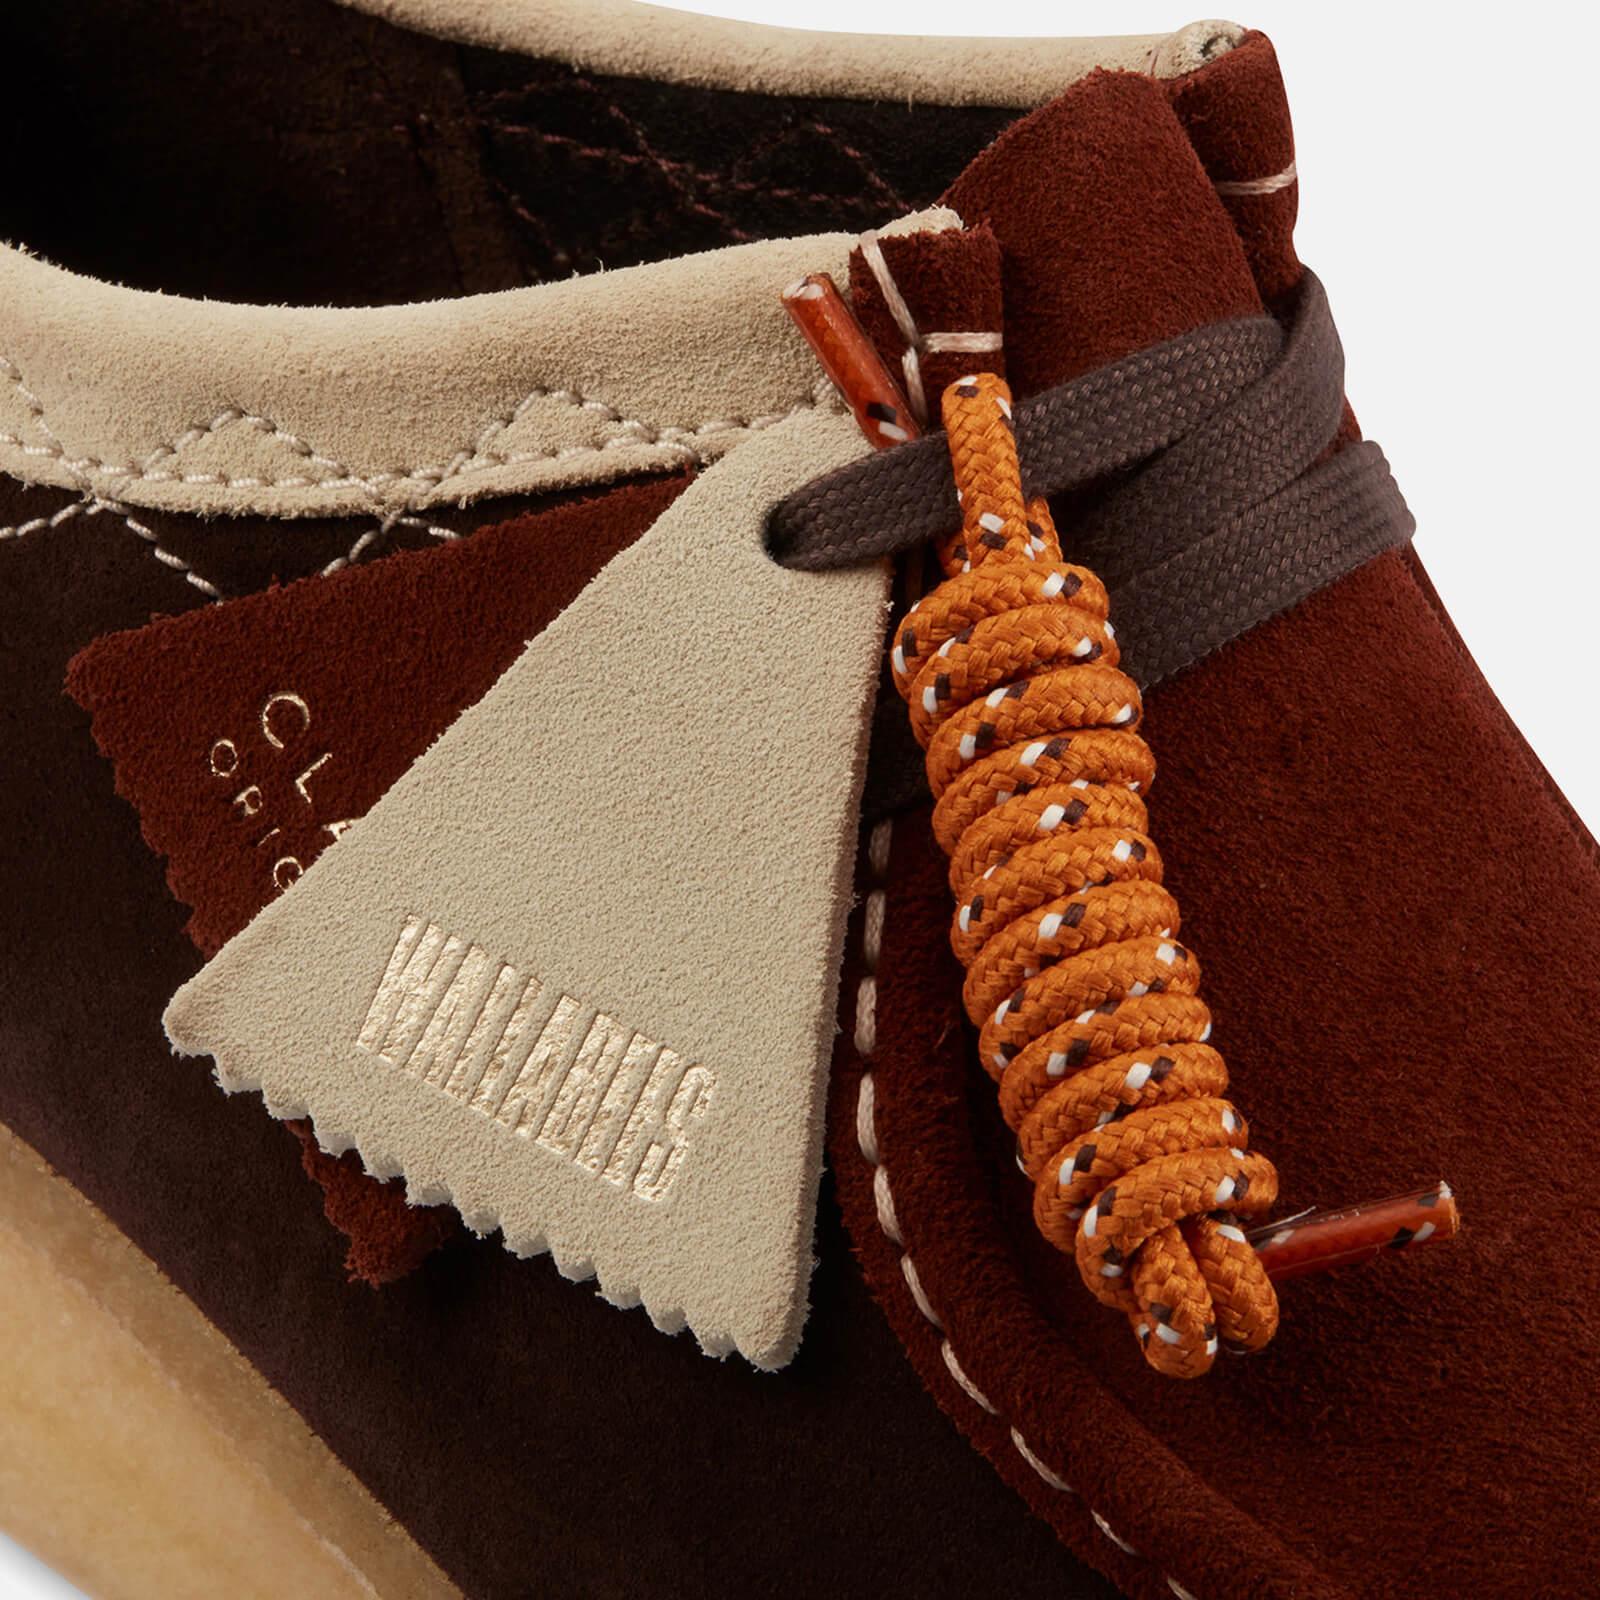 Clarks Stitch Pack' Suede Wallabee Shoes in Brown for Men | Lyst